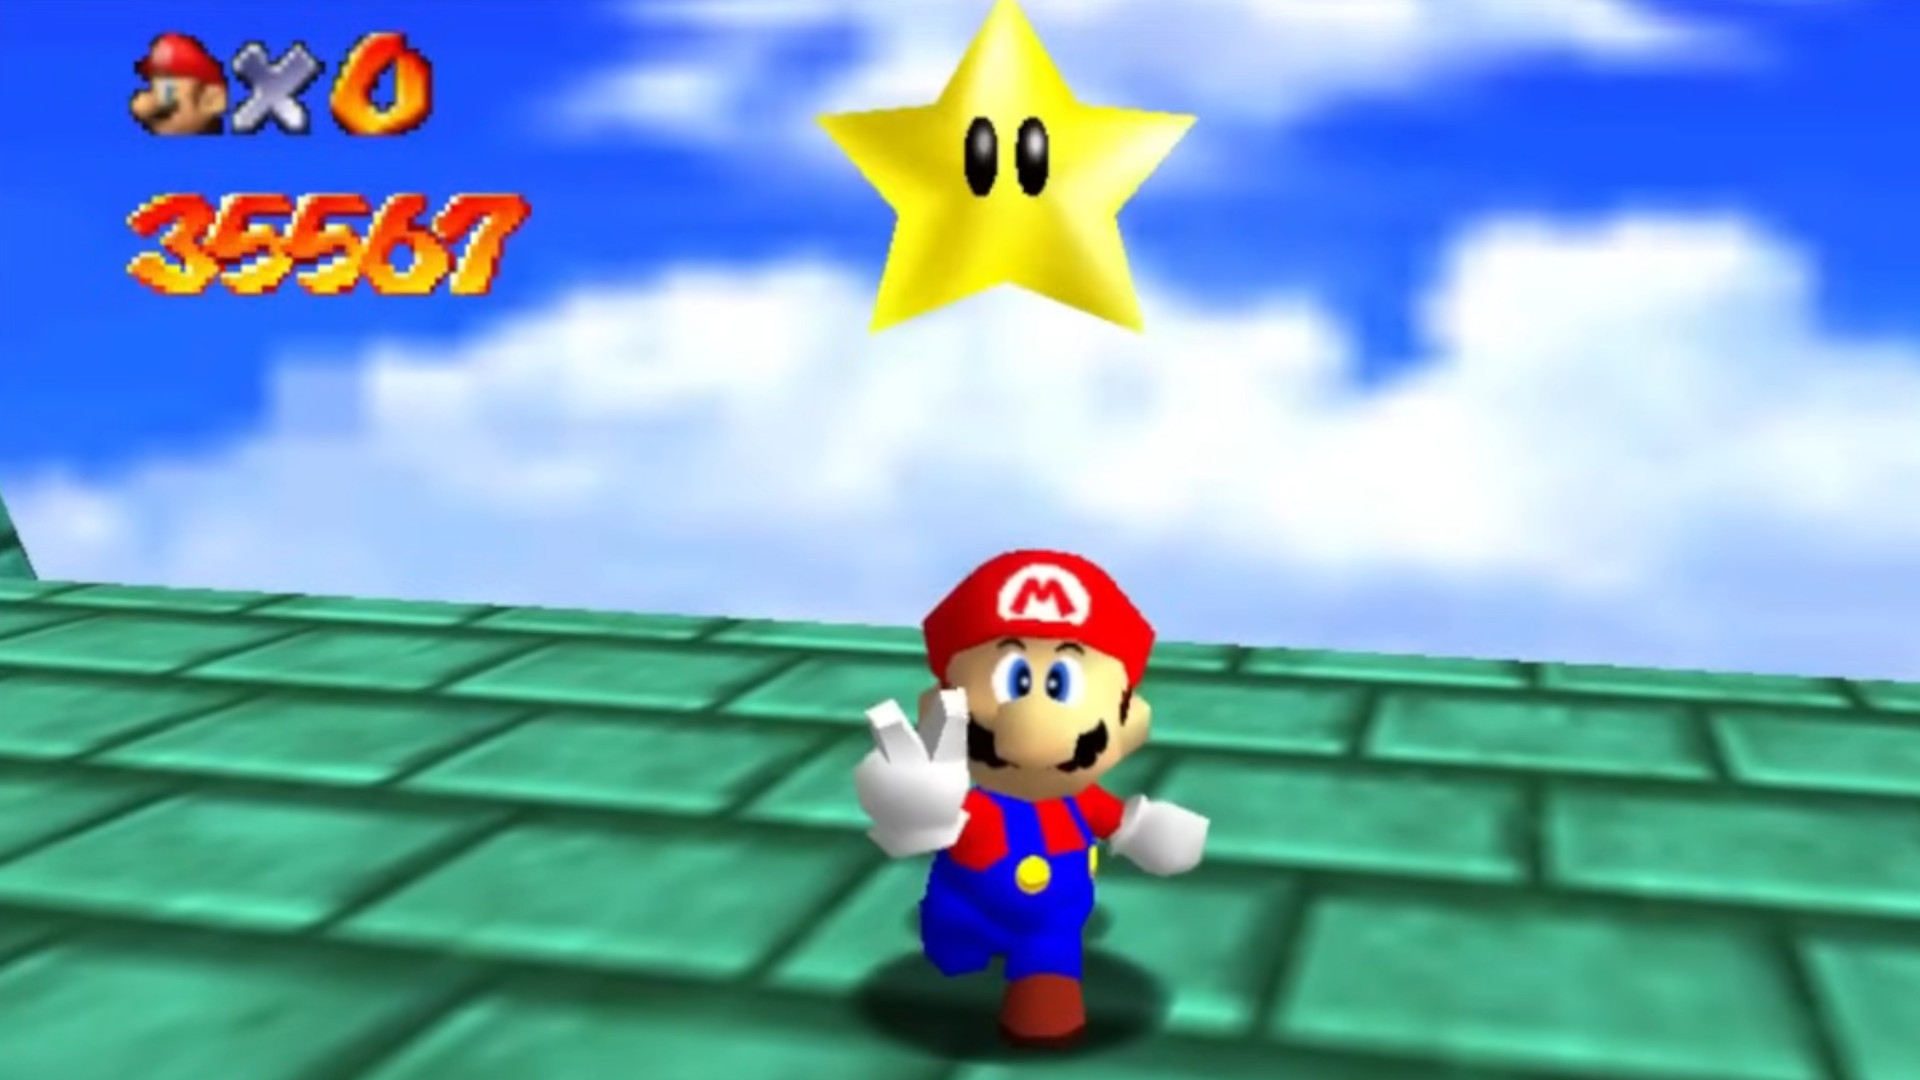 Incredible Super Mario 64 speedrun falls apart after one botched trick dooms what could’ve been an untouchable world record: “I don’t know if I want to finish this”